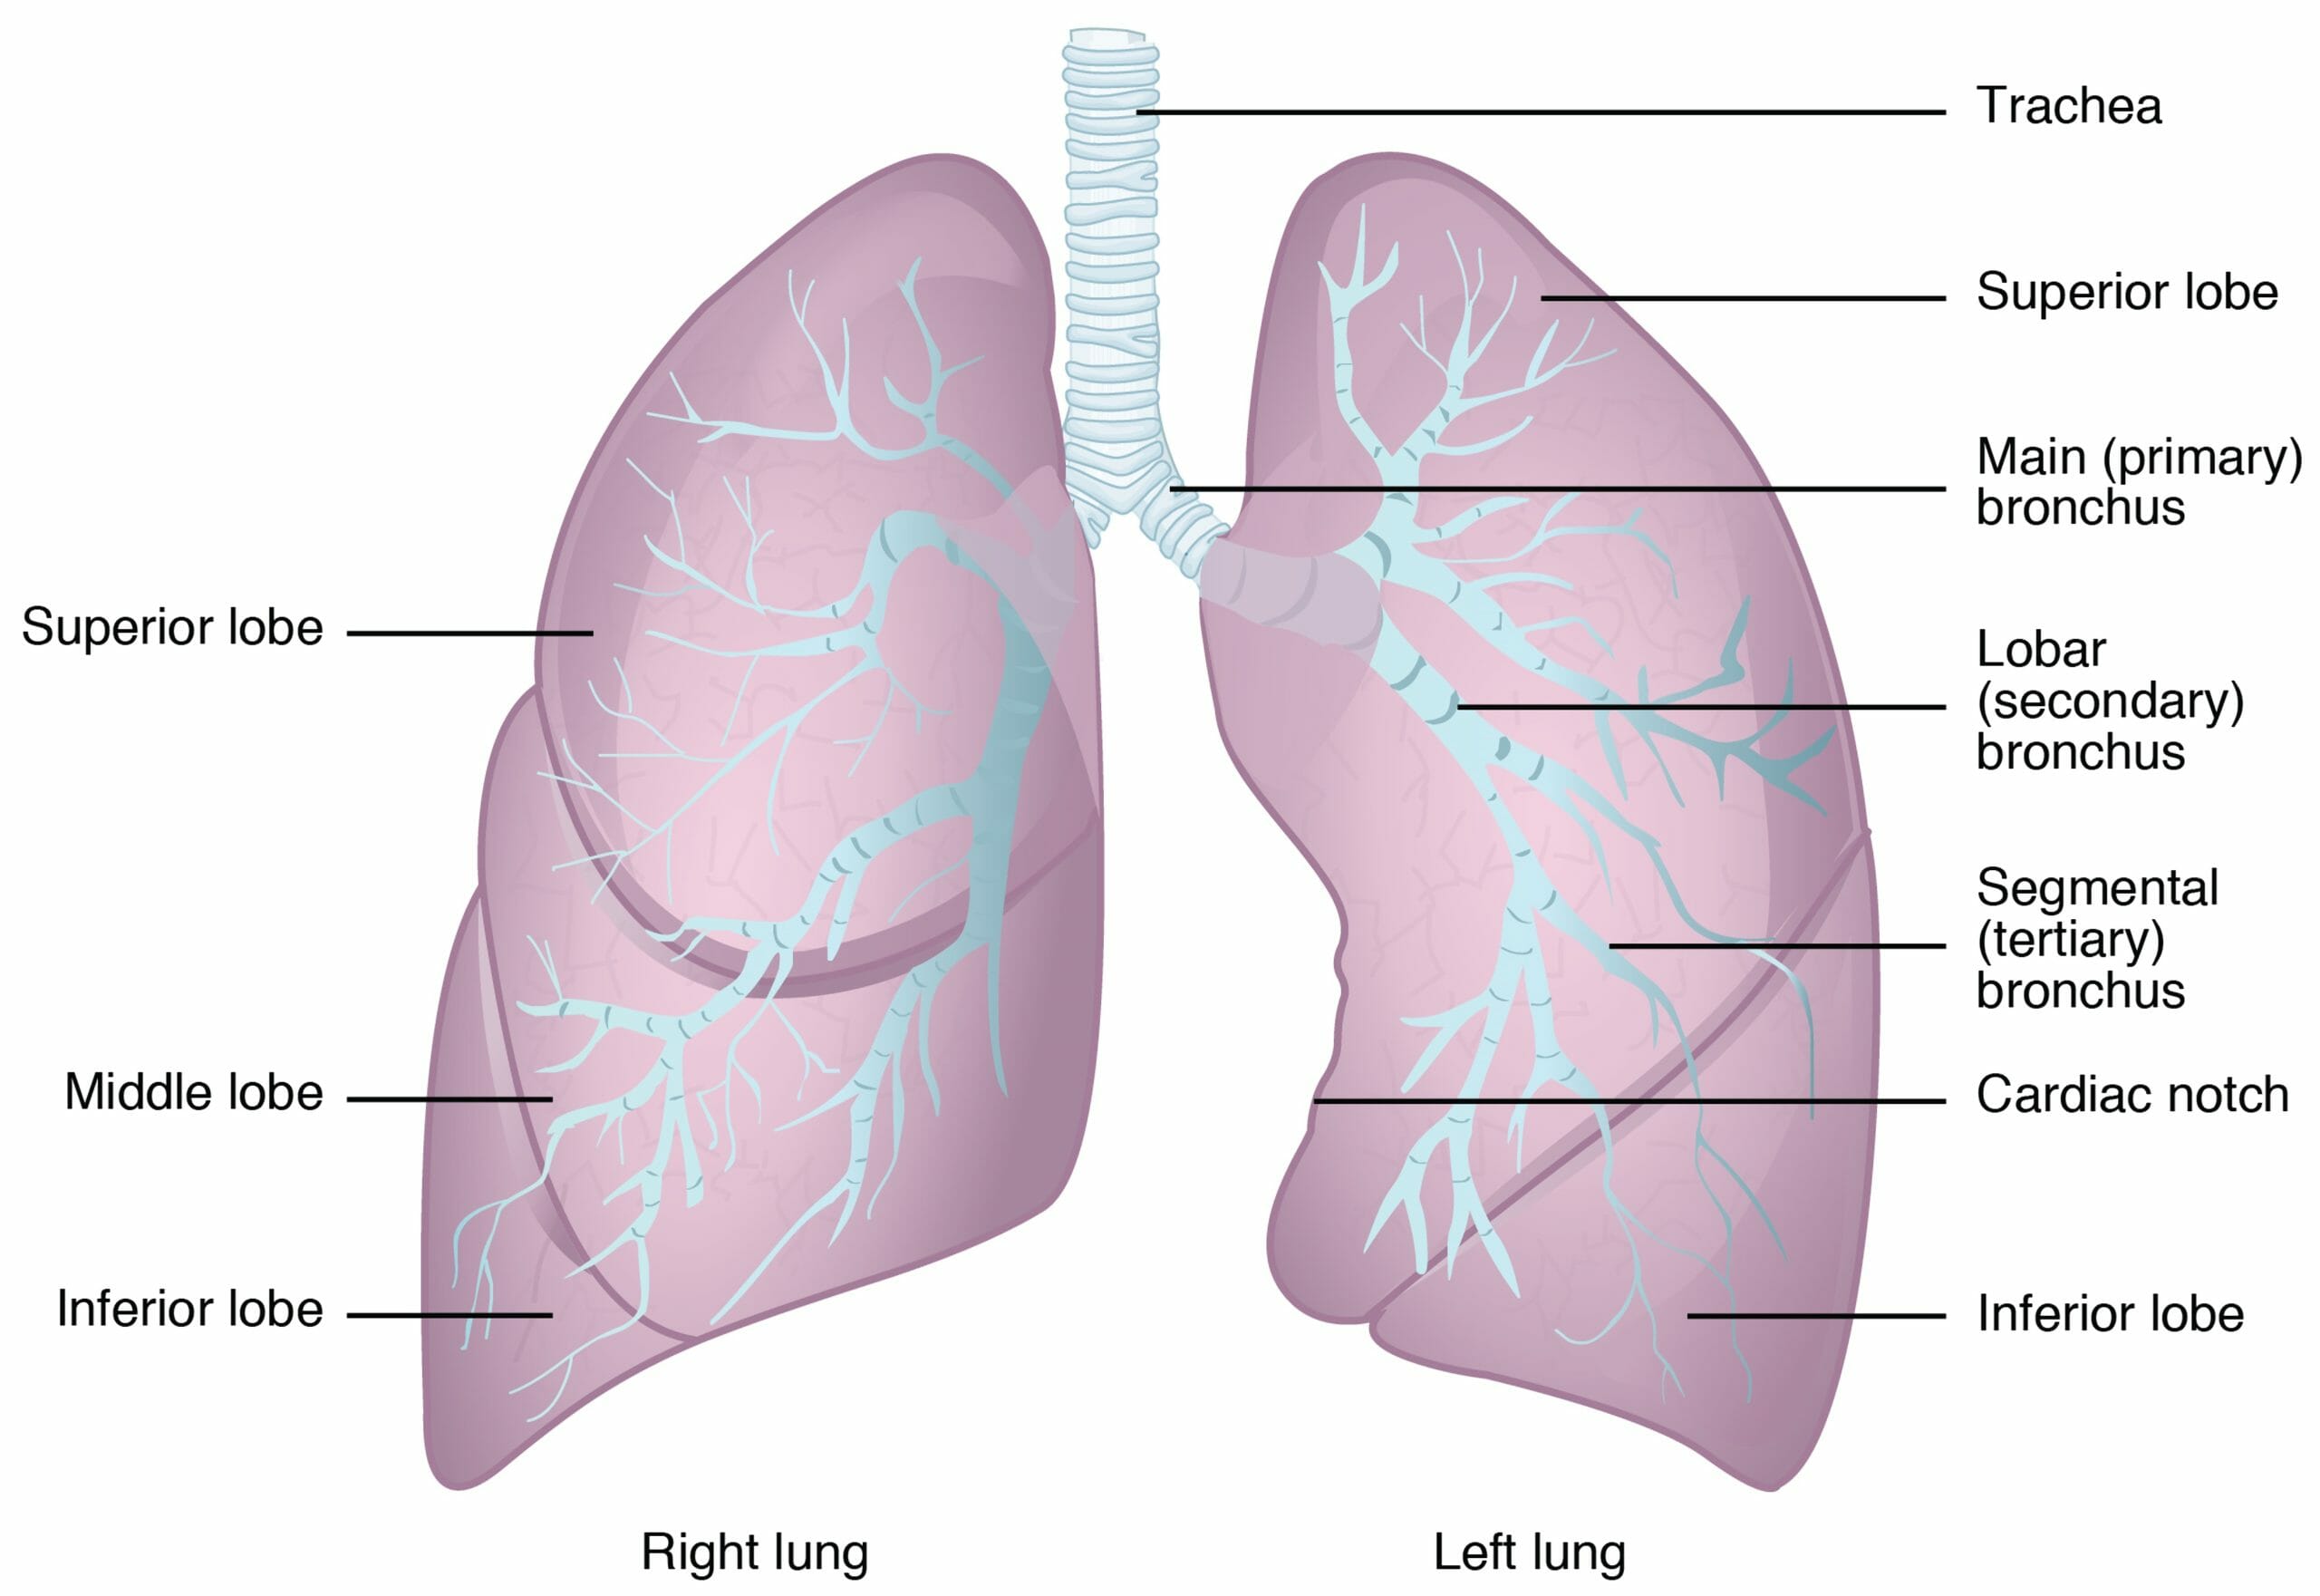 The anatomy of the lower respiratory tract